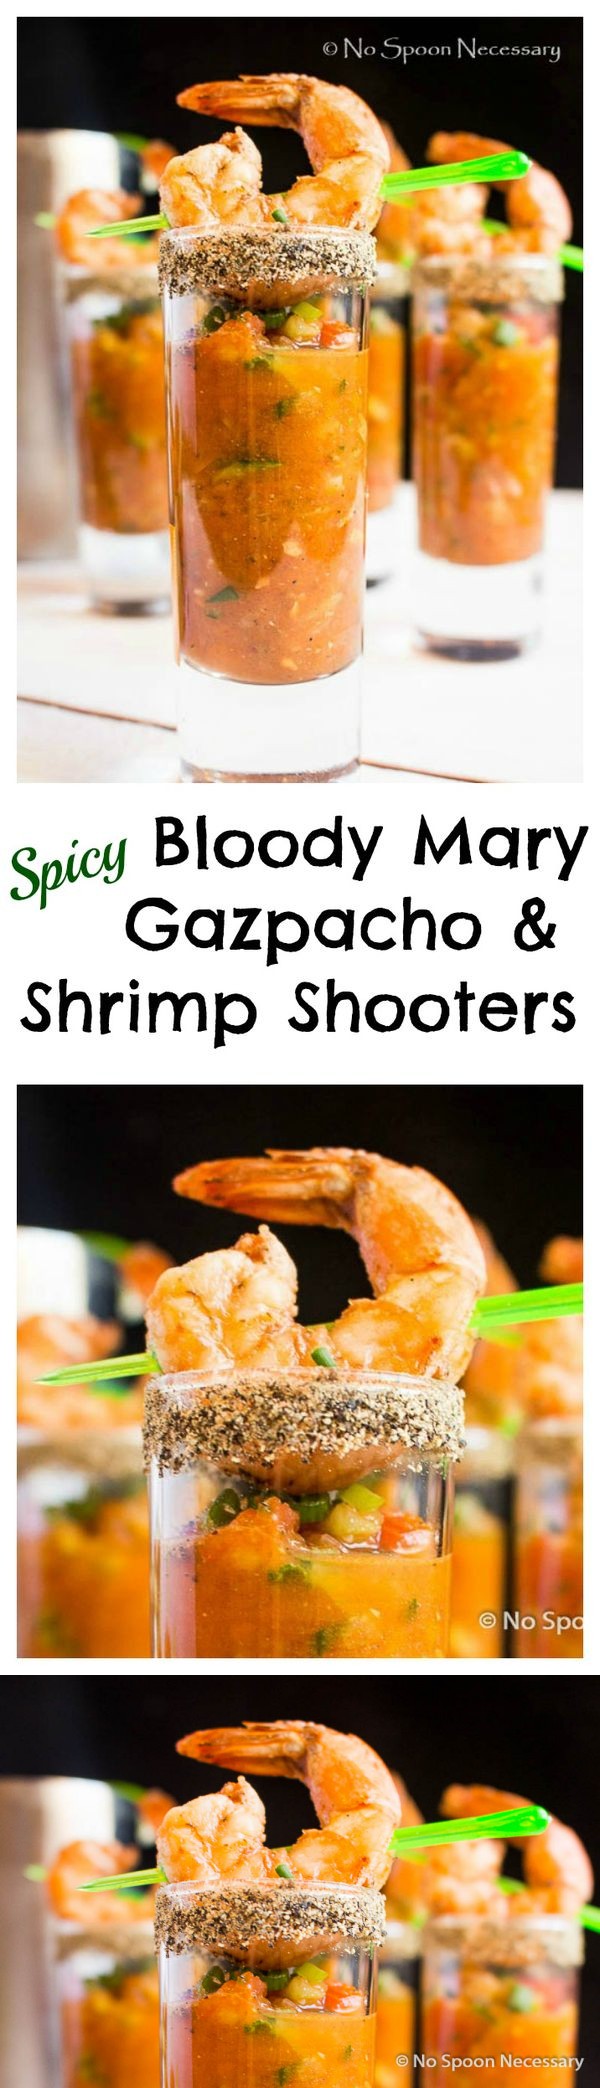 Spicy Bloody Mary Gazpacho & Shrimp Shooters